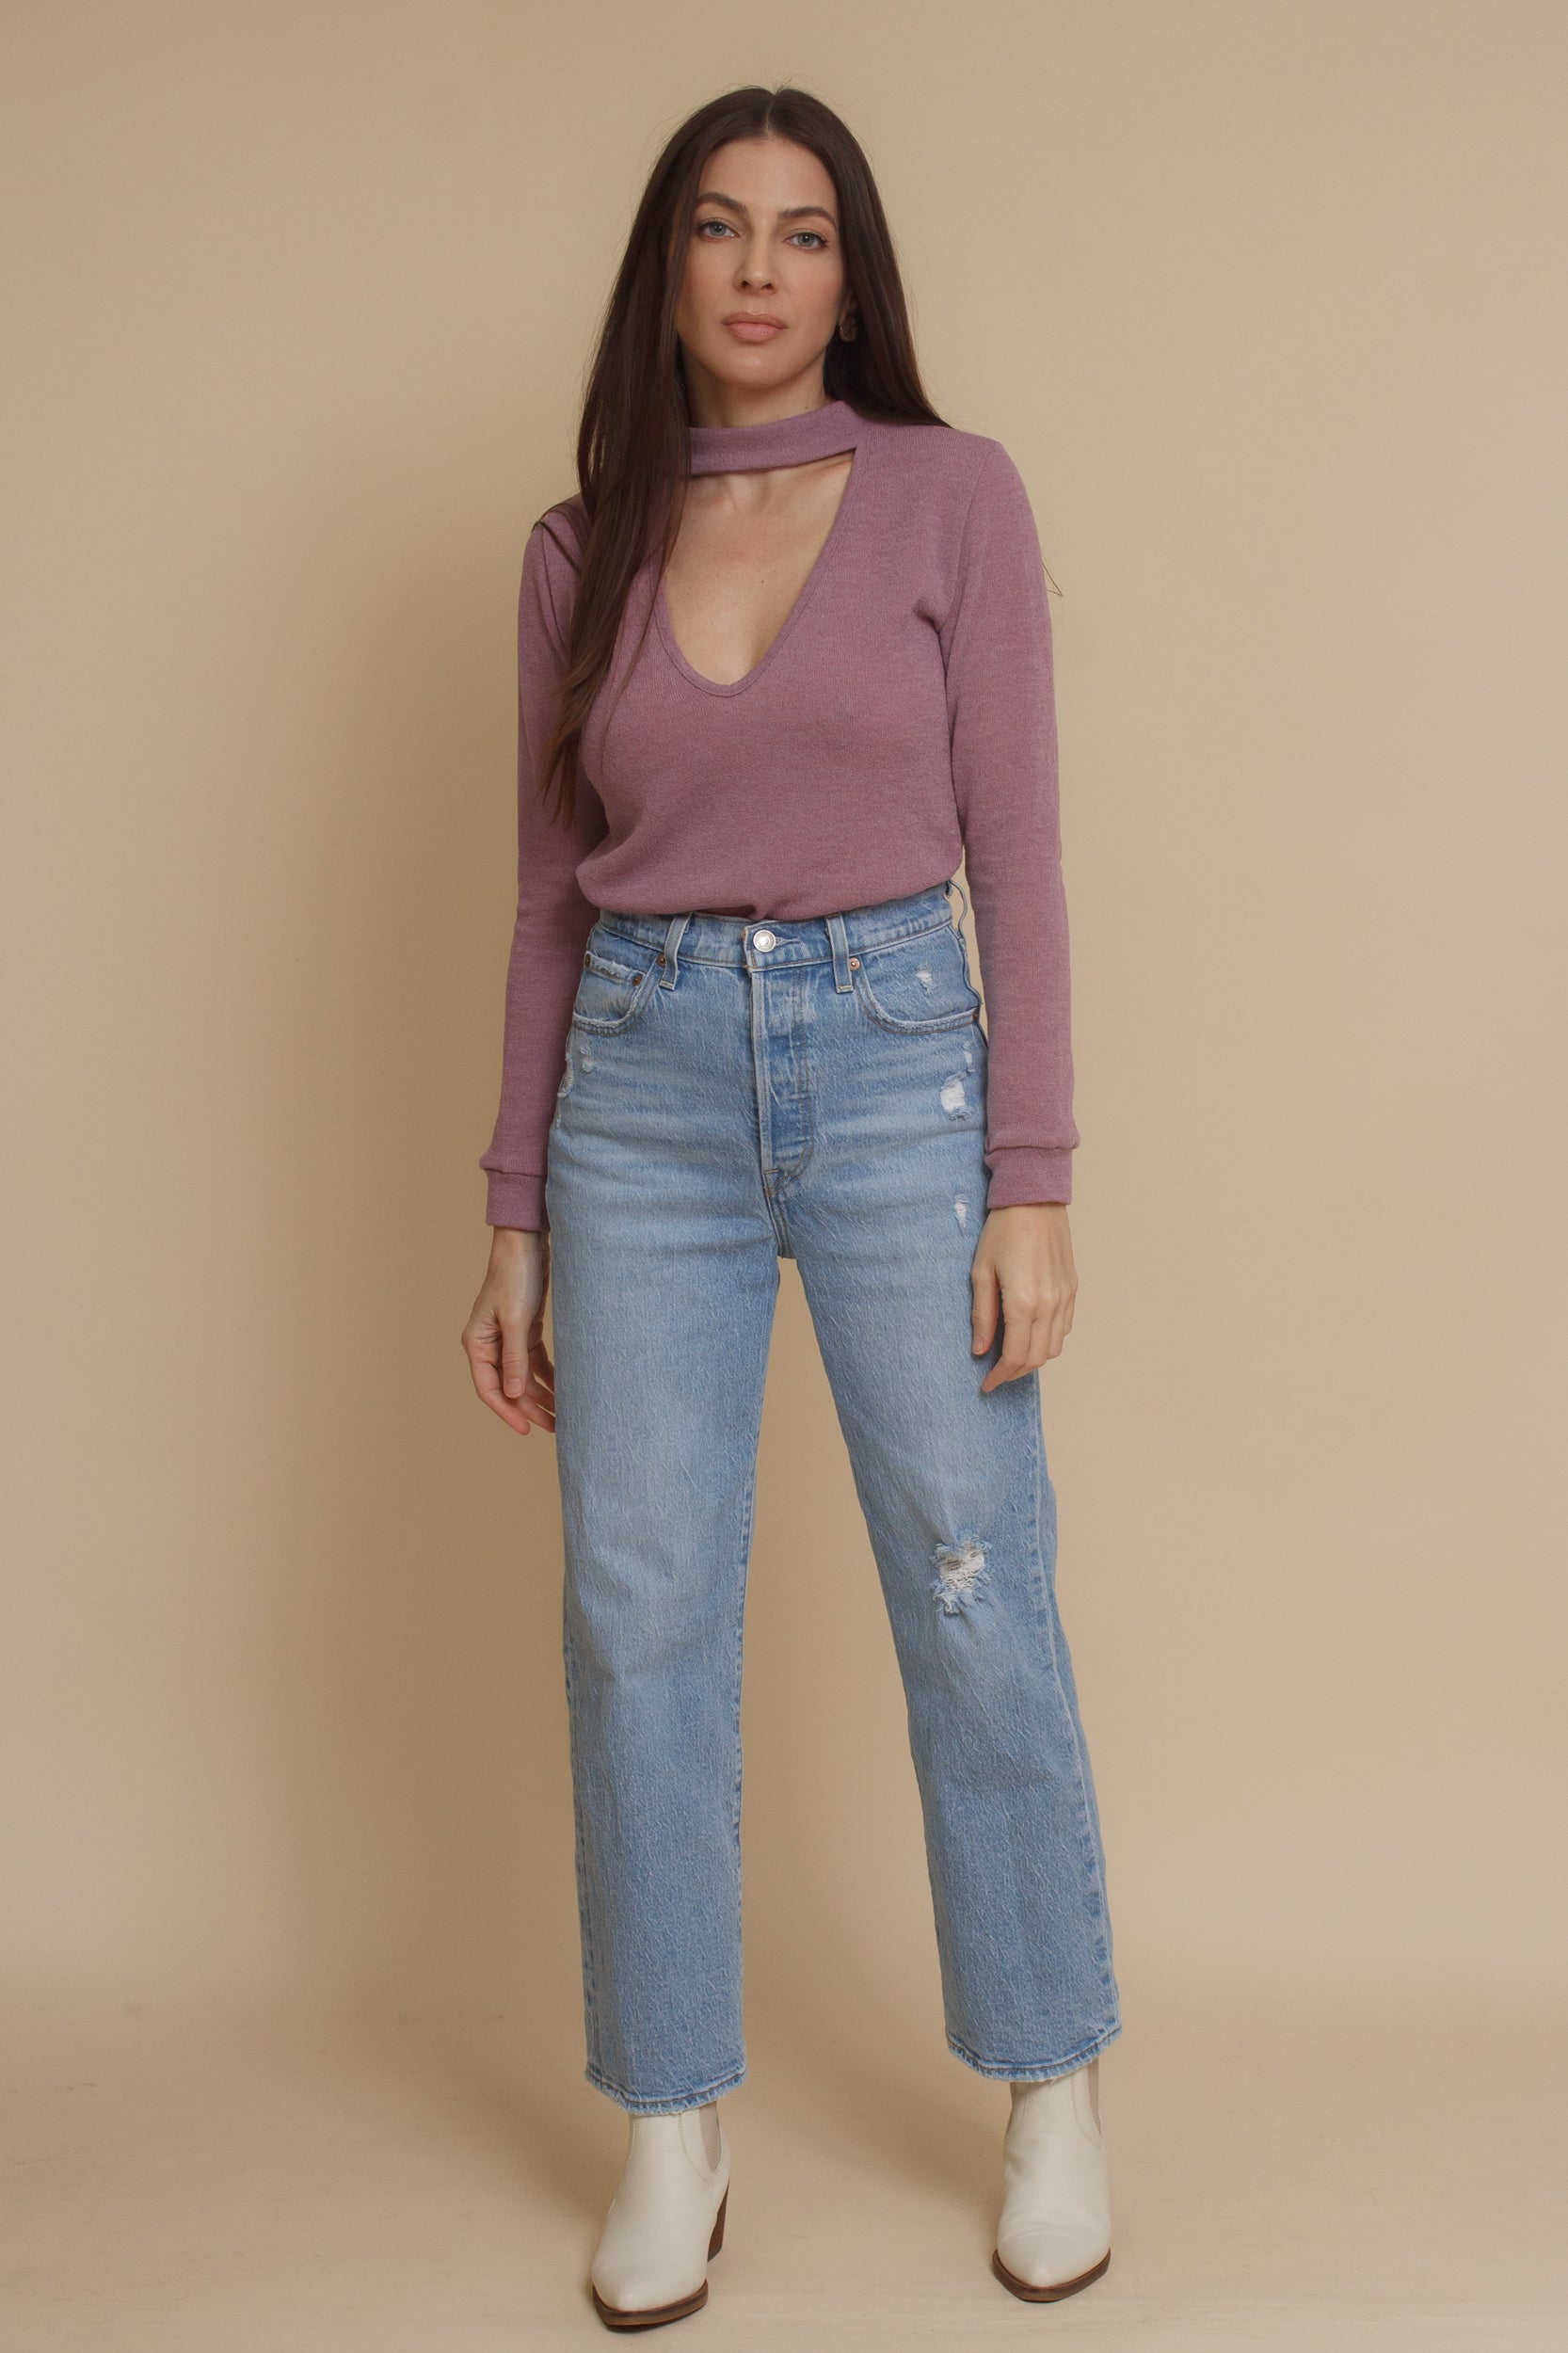 Knit top with choker cut out neckline, in mauve. Image 10